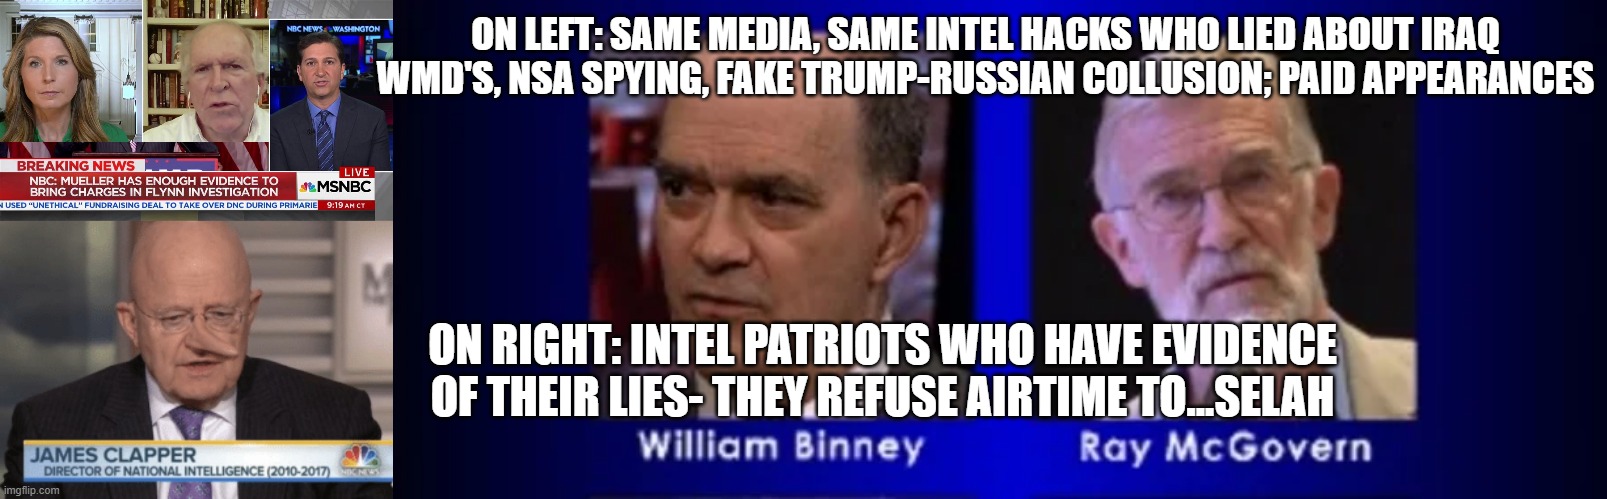 CREDIBILITY WAR, 'NUFF SAID | ON LEFT: SAME MEDIA, SAME INTEL HACKS WHO LIED ABOUT IRAQ WMD'S, NSA SPYING, FAKE TRUMP-RUSSIAN COLLUSION; PAID APPEARANCES; ON RIGHT: INTEL PATRIOTS WHO HAVE EVIDENCE OF THEIR LIES- THEY REFUSE AIRTIME TO...SELAH | image tagged in james clapper,john brennan,cnn,nbc,trump,election fraud | made w/ Imgflip meme maker